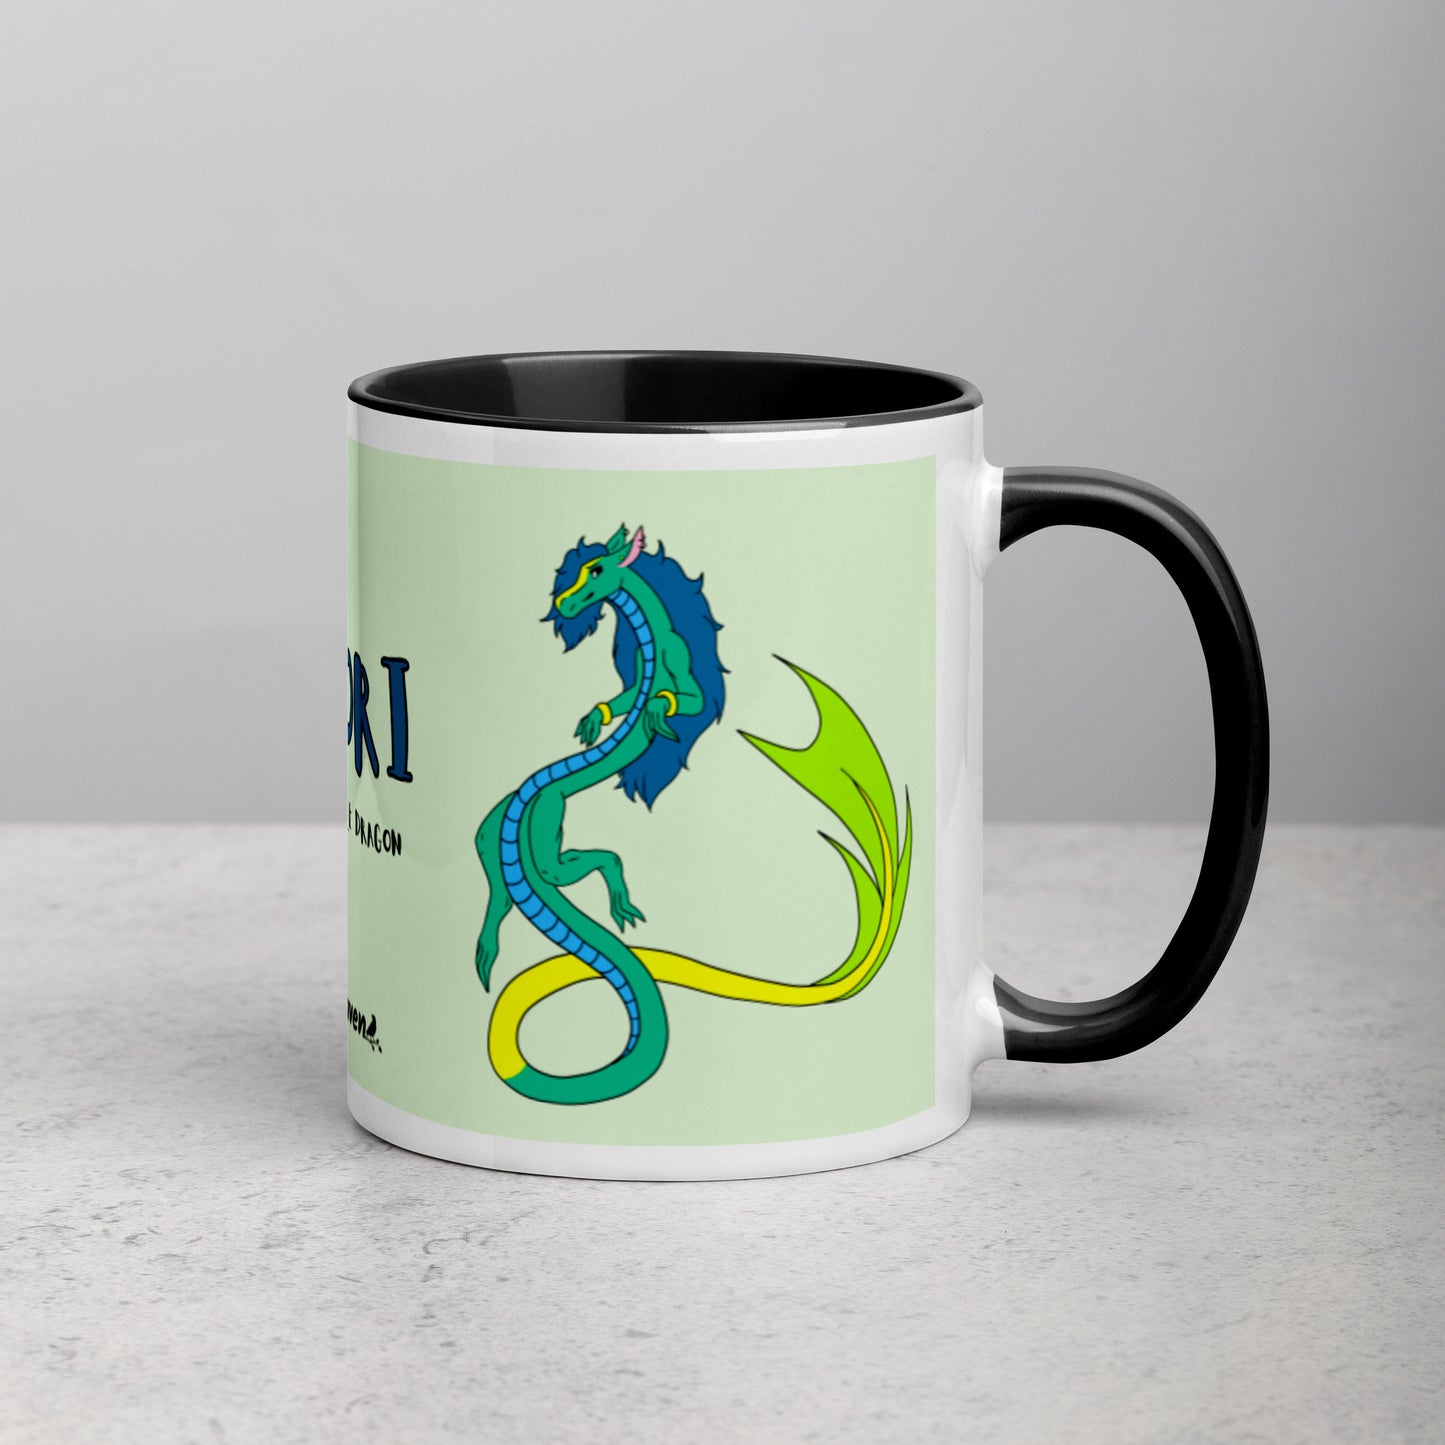 11 ounce white ceramic mug. Black inside and handle. Features double-sided image of Mikori the Fuzzy Noodle Dragon. Shown on tabletop with handle facing right.